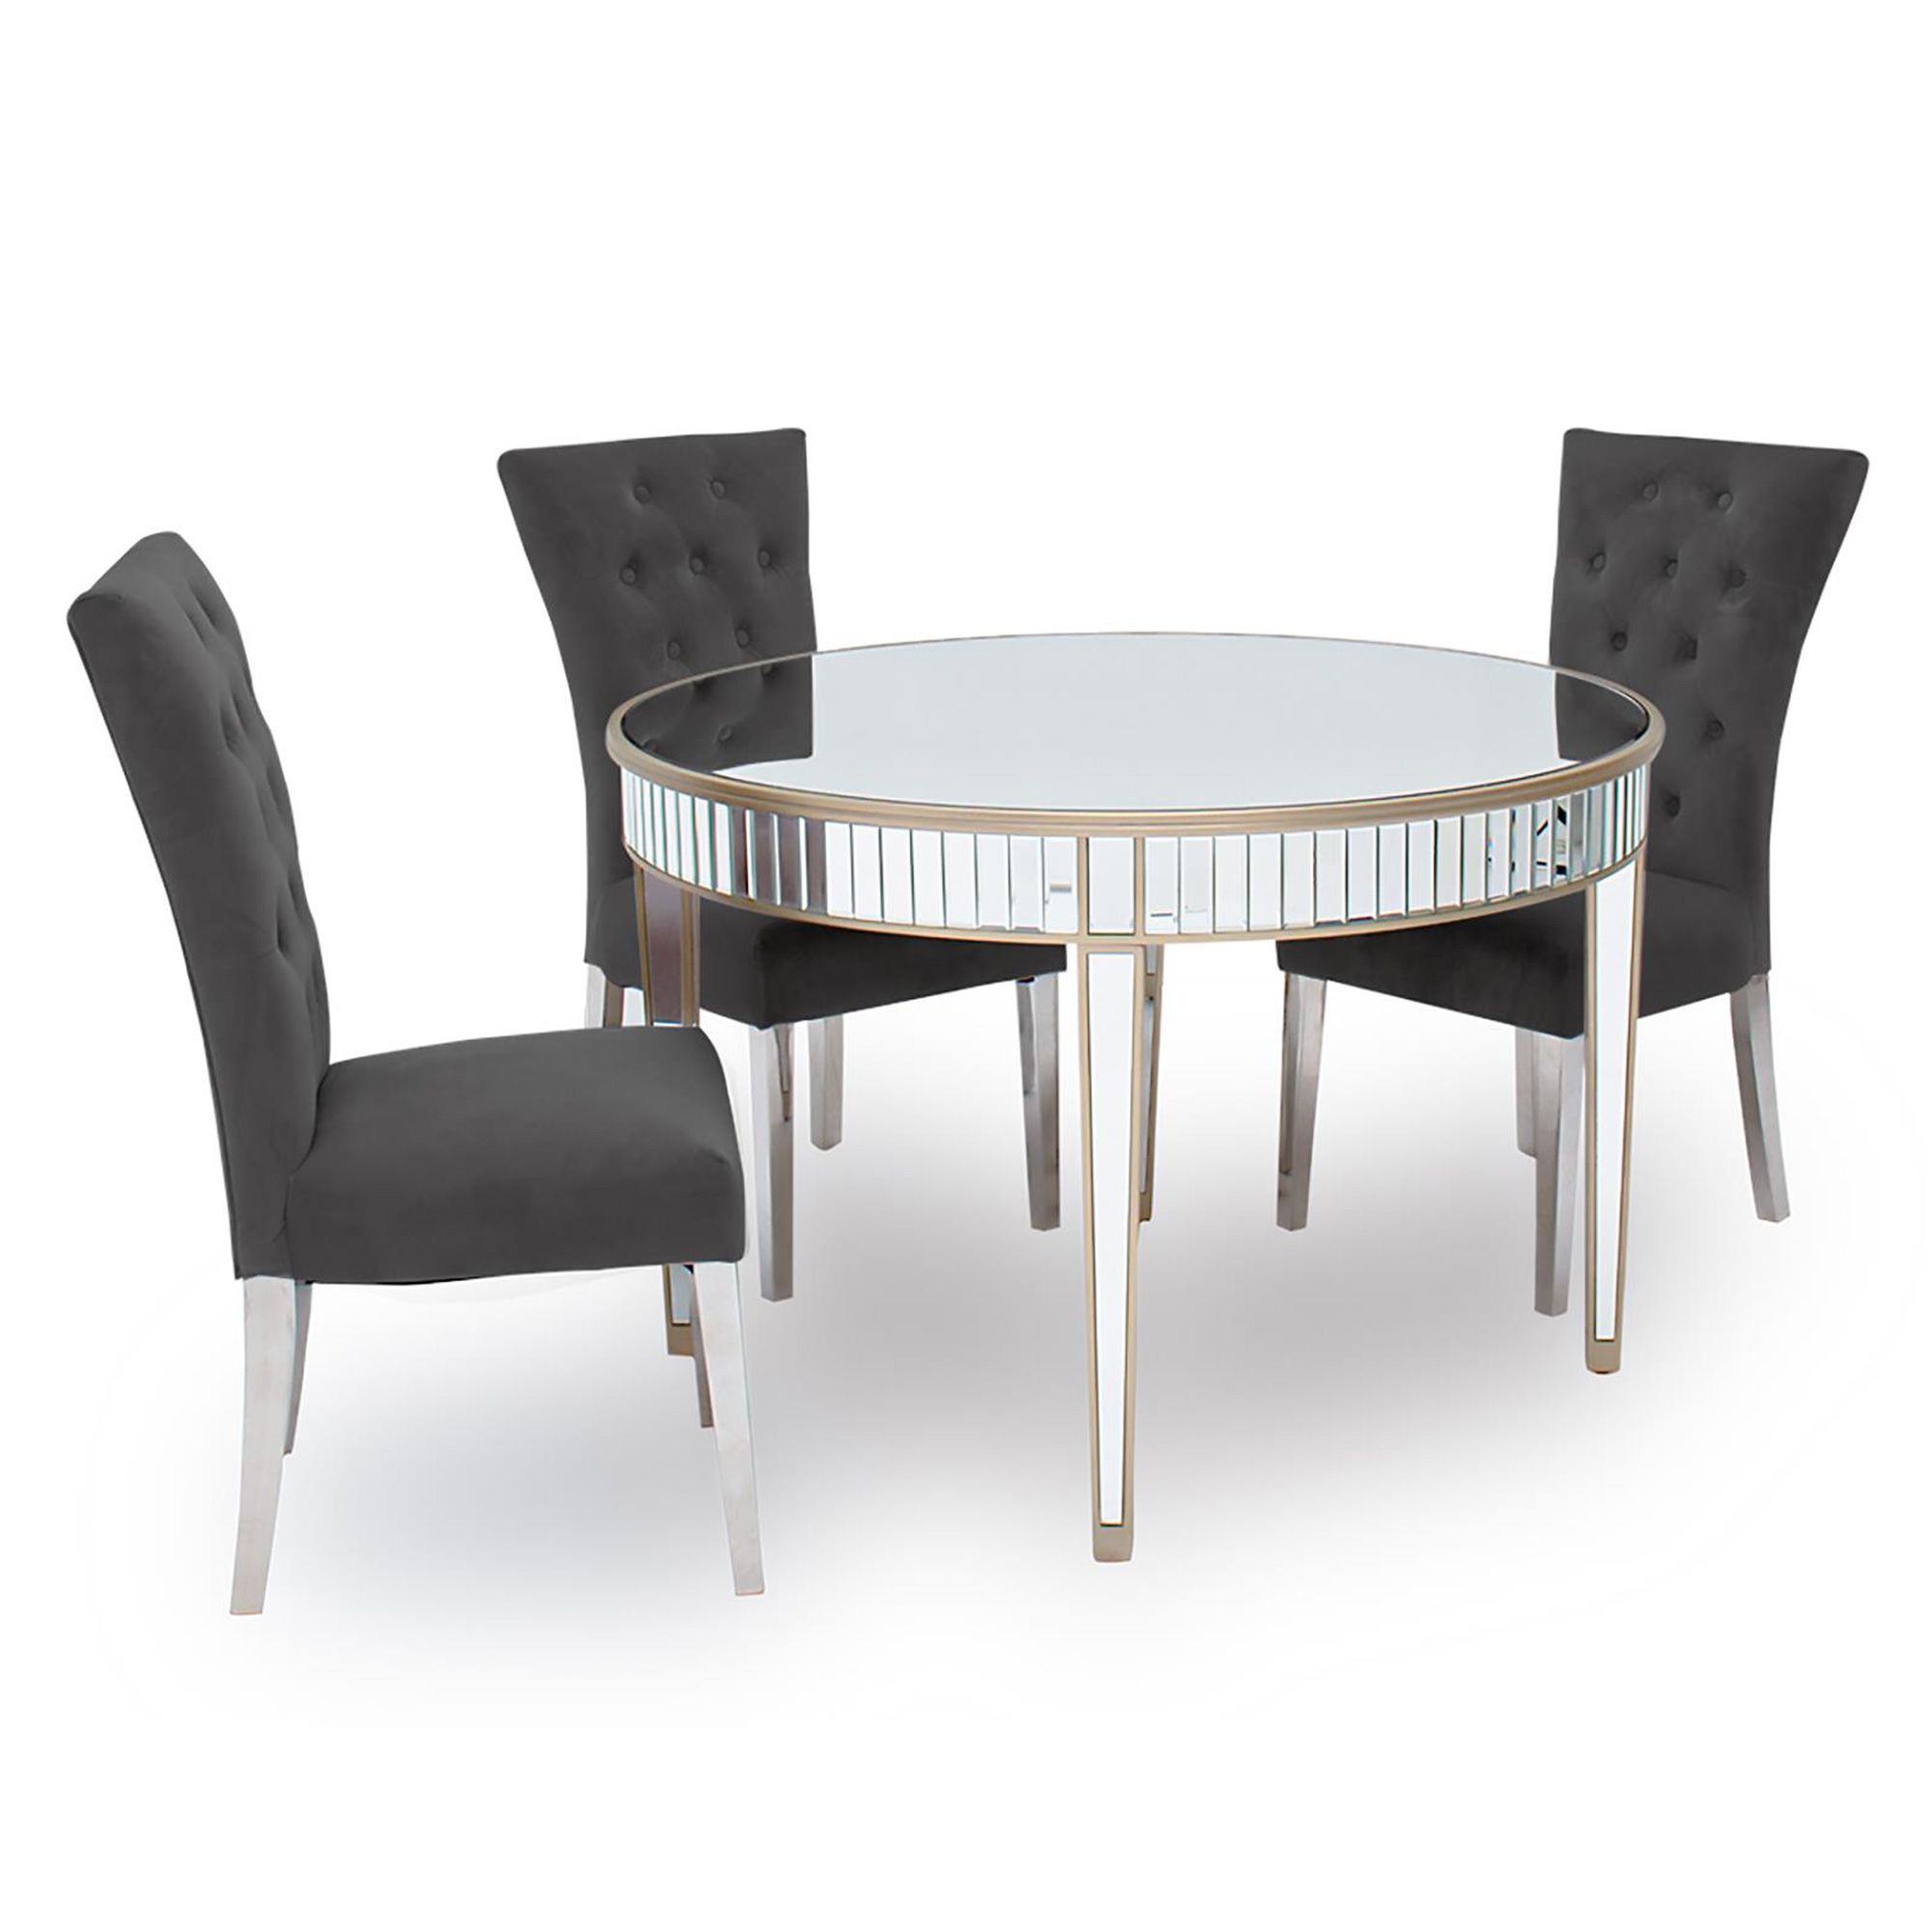 Ashley 4 Person Round Dining Table, Round Mirrored Dining Table And Chairs